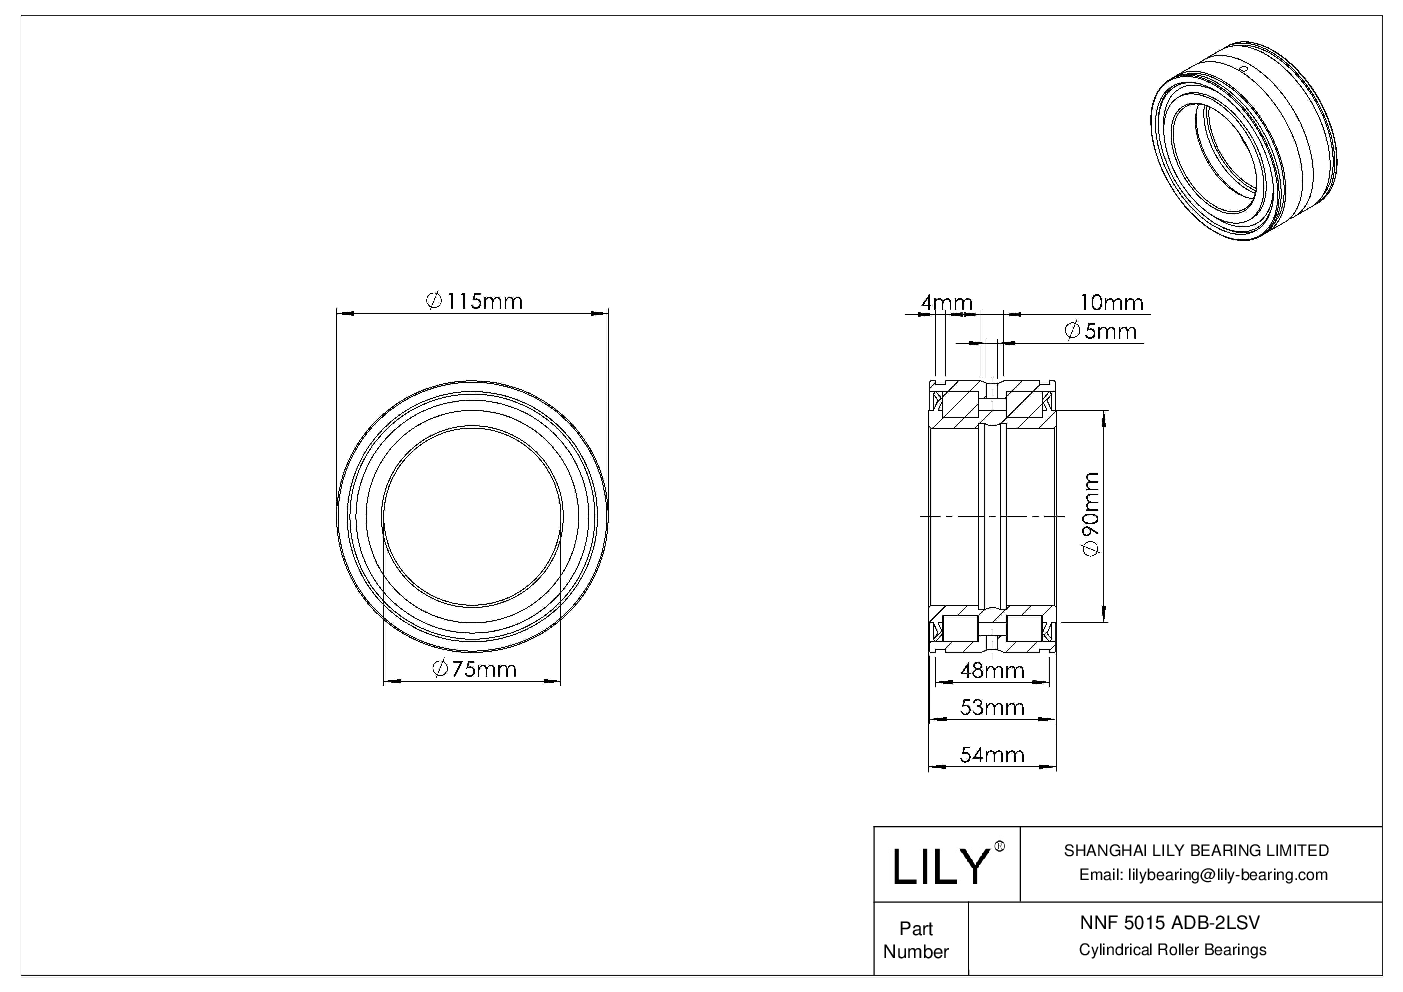 NNF 5015 ADB-2LSV Double Row Full Complement Cylindrical Roller Bearings cad drawing